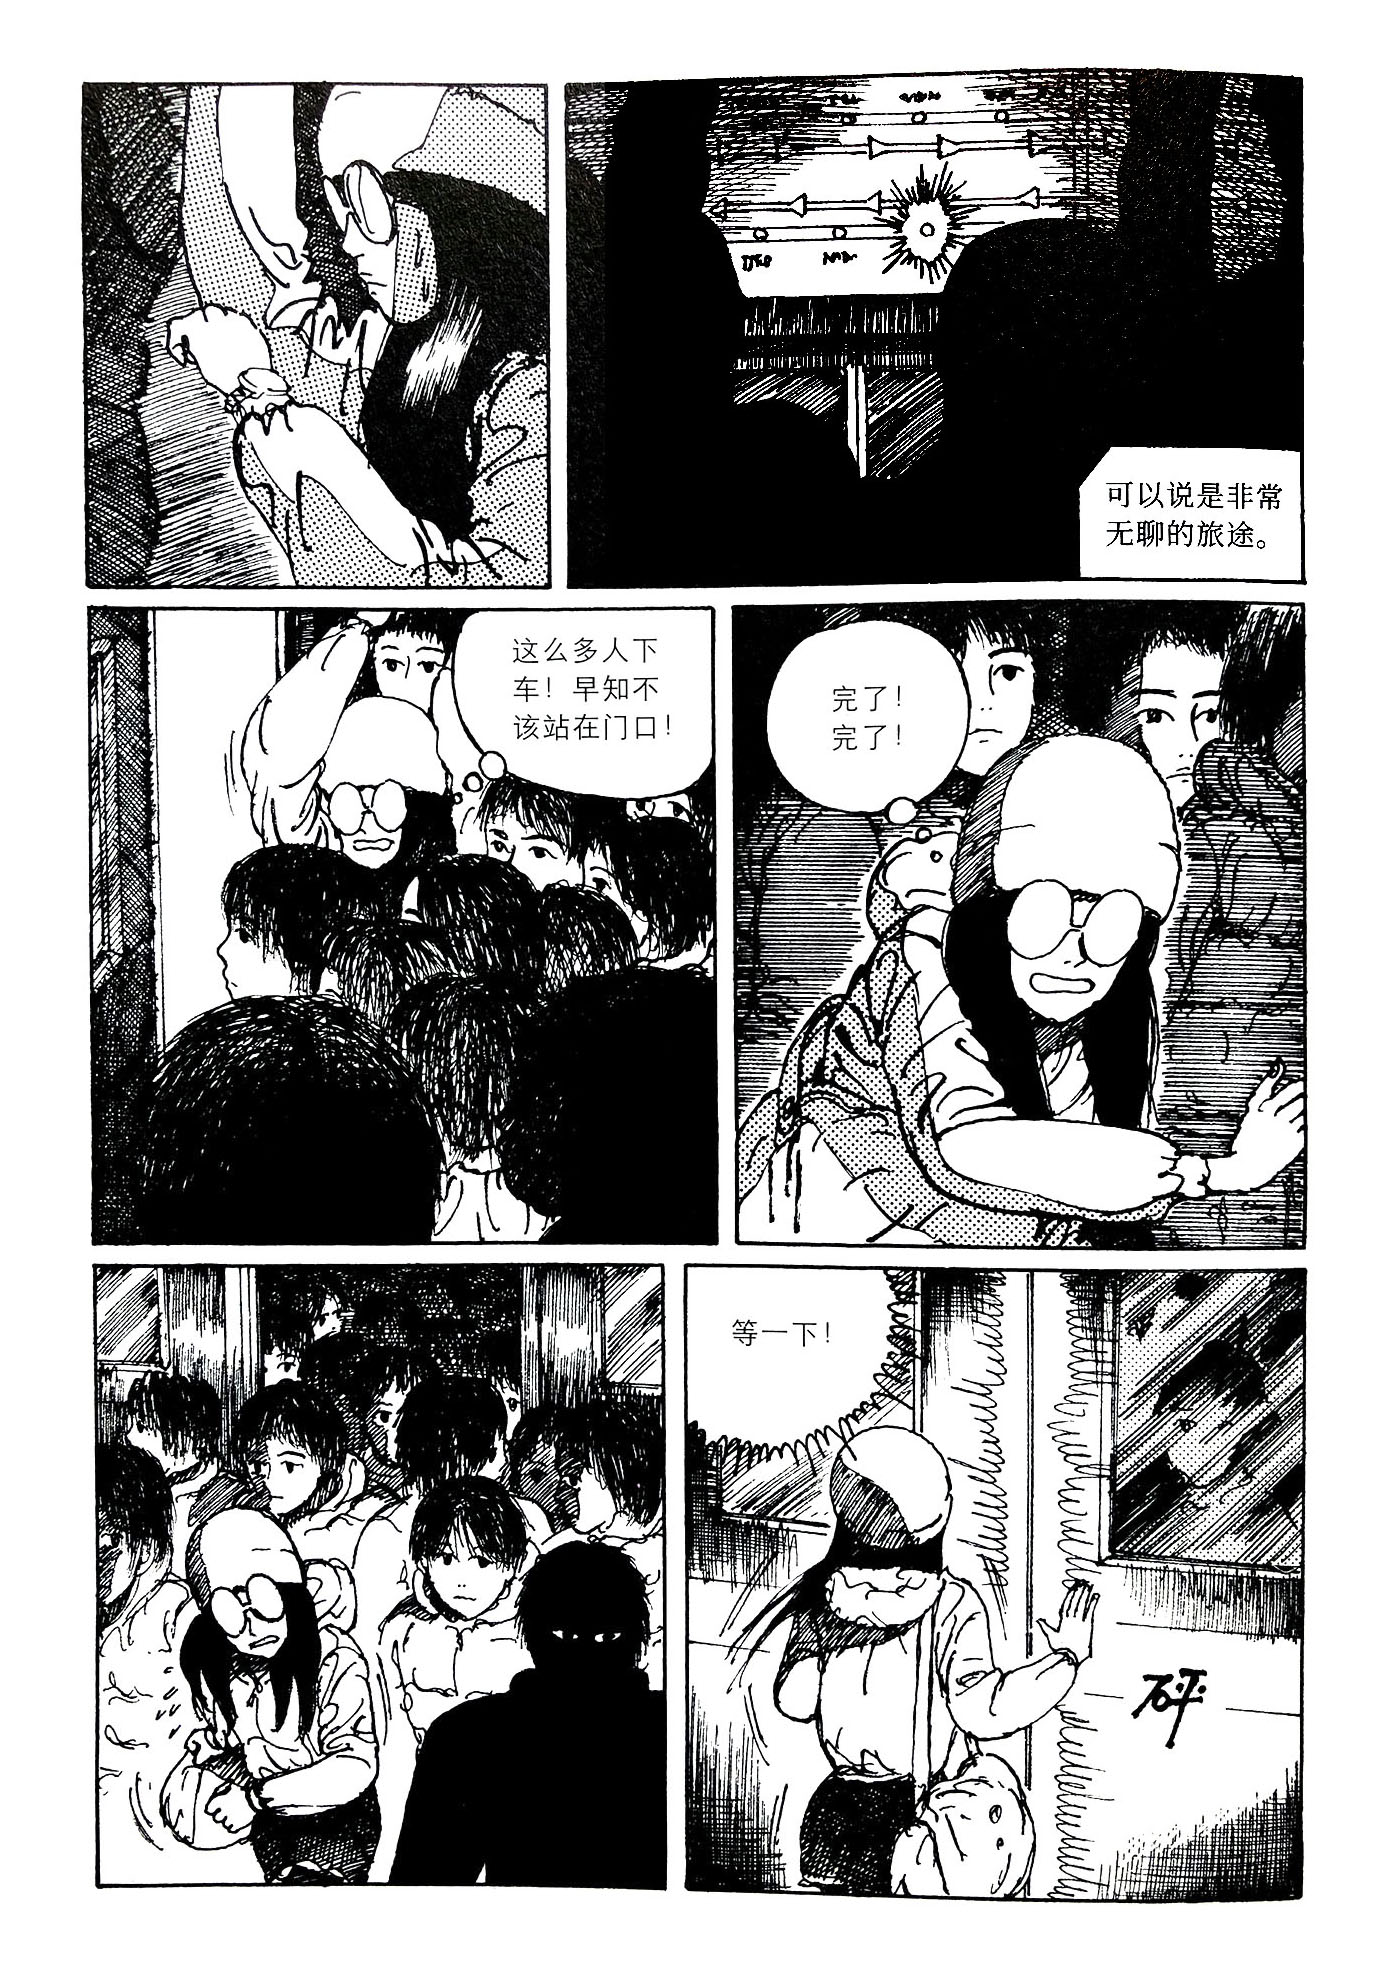 Excerpt from Night Bus of several black and white illustrated panels showing a woman being inadvertently squeezed out of a very crowded train